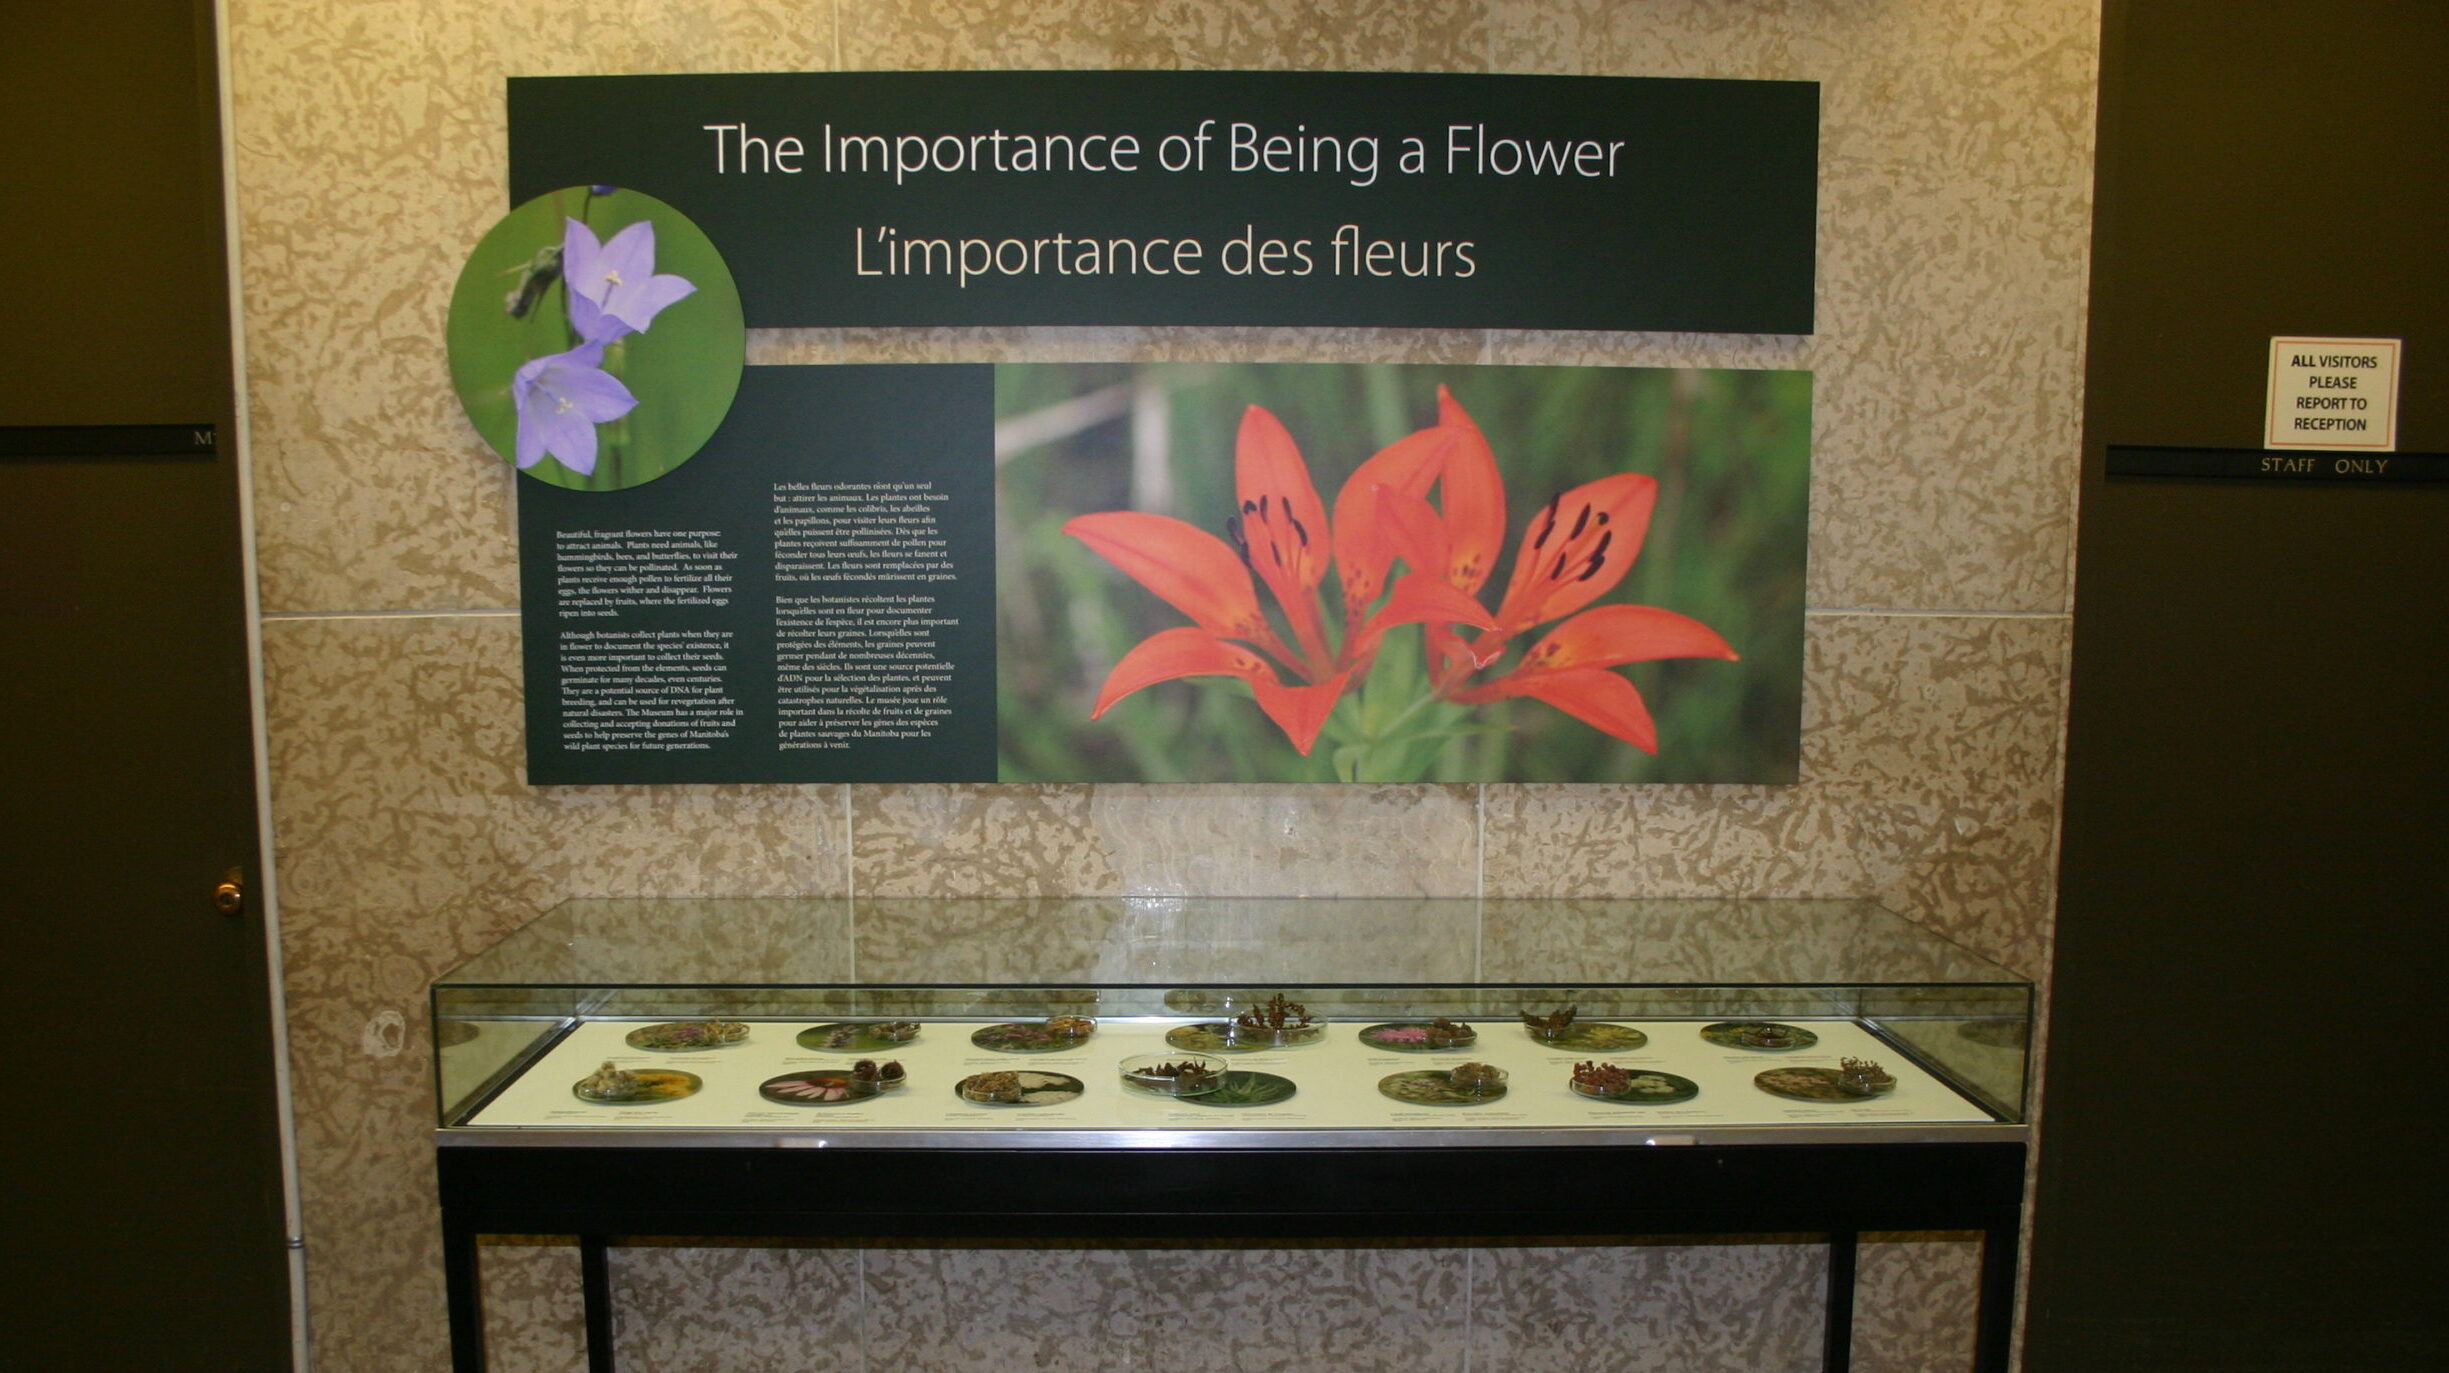 A display case containing a series of fruits and seeds of wildflowers, with a large text panel on the wall behind it.